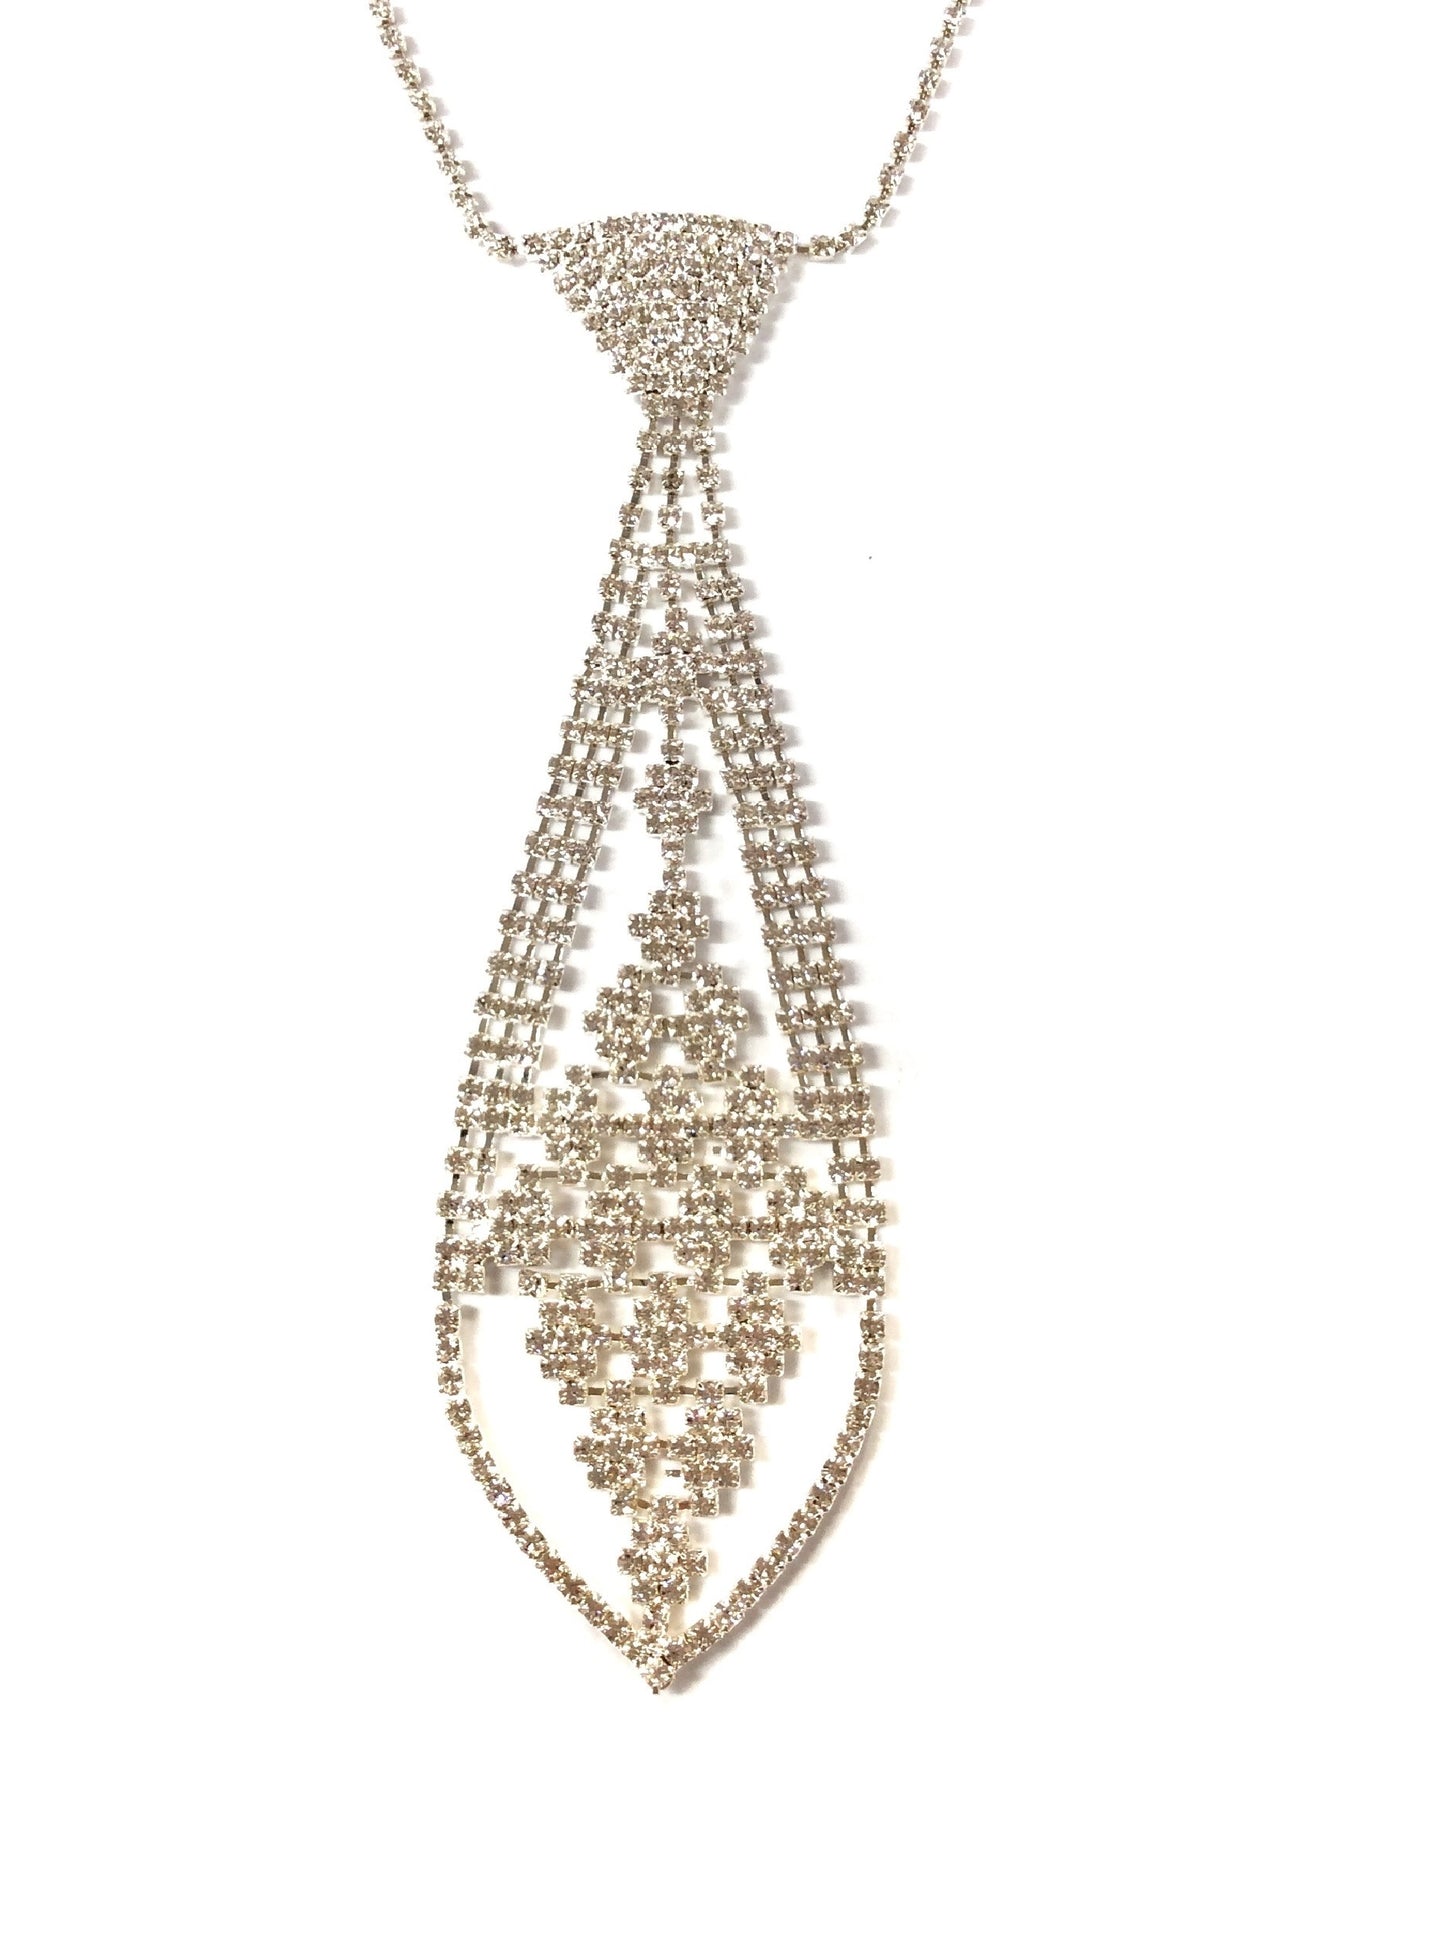 Crystal Tie Necklace #88-5005G (Gold)